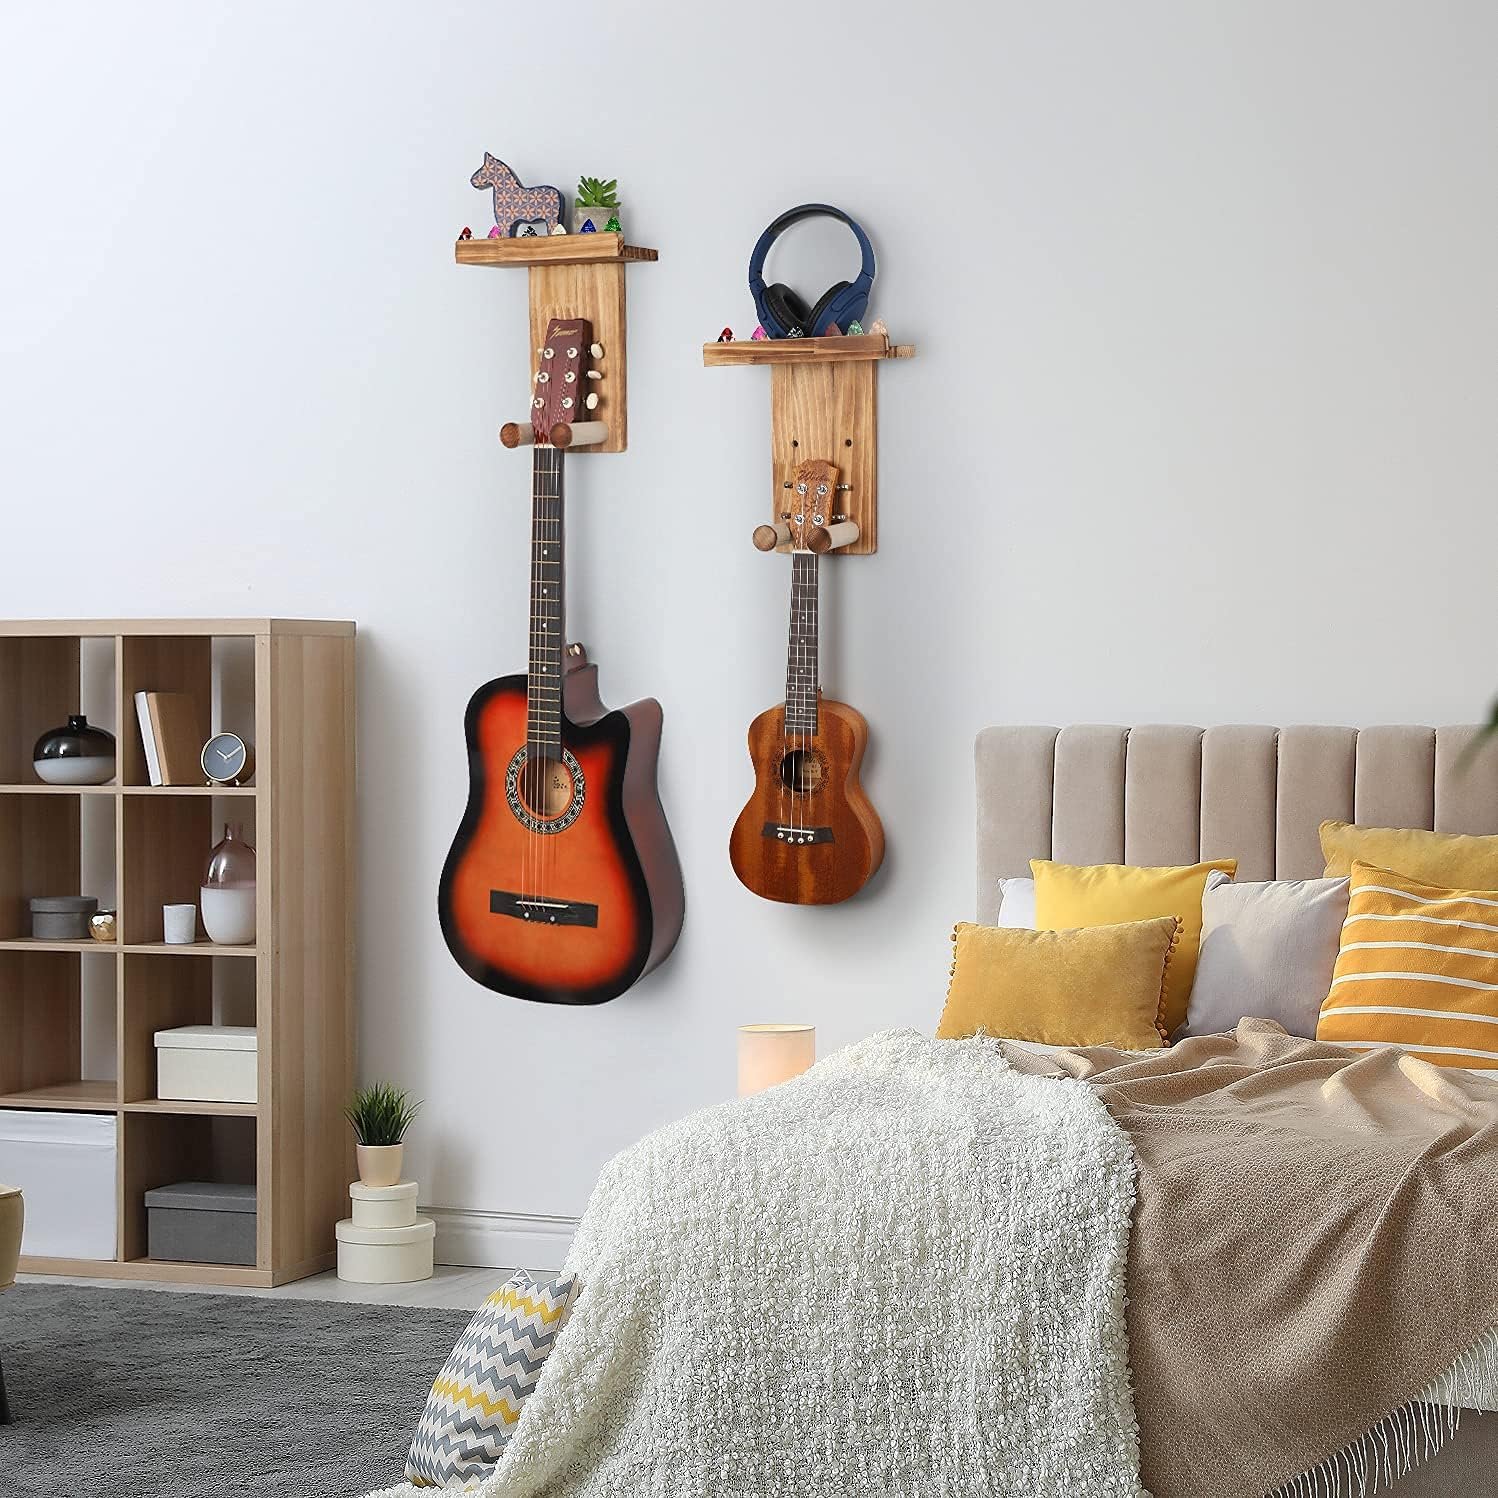 Keebofly Guitar Wall Mount,2 Pack Guitar Wall Hangers Holder Guitar Hanger Shelf with Pick Holder Wood Guitar Rack for Acoustic or Electric Guitar,Ukulele,Bass,Mandolin Brown,[Patented]